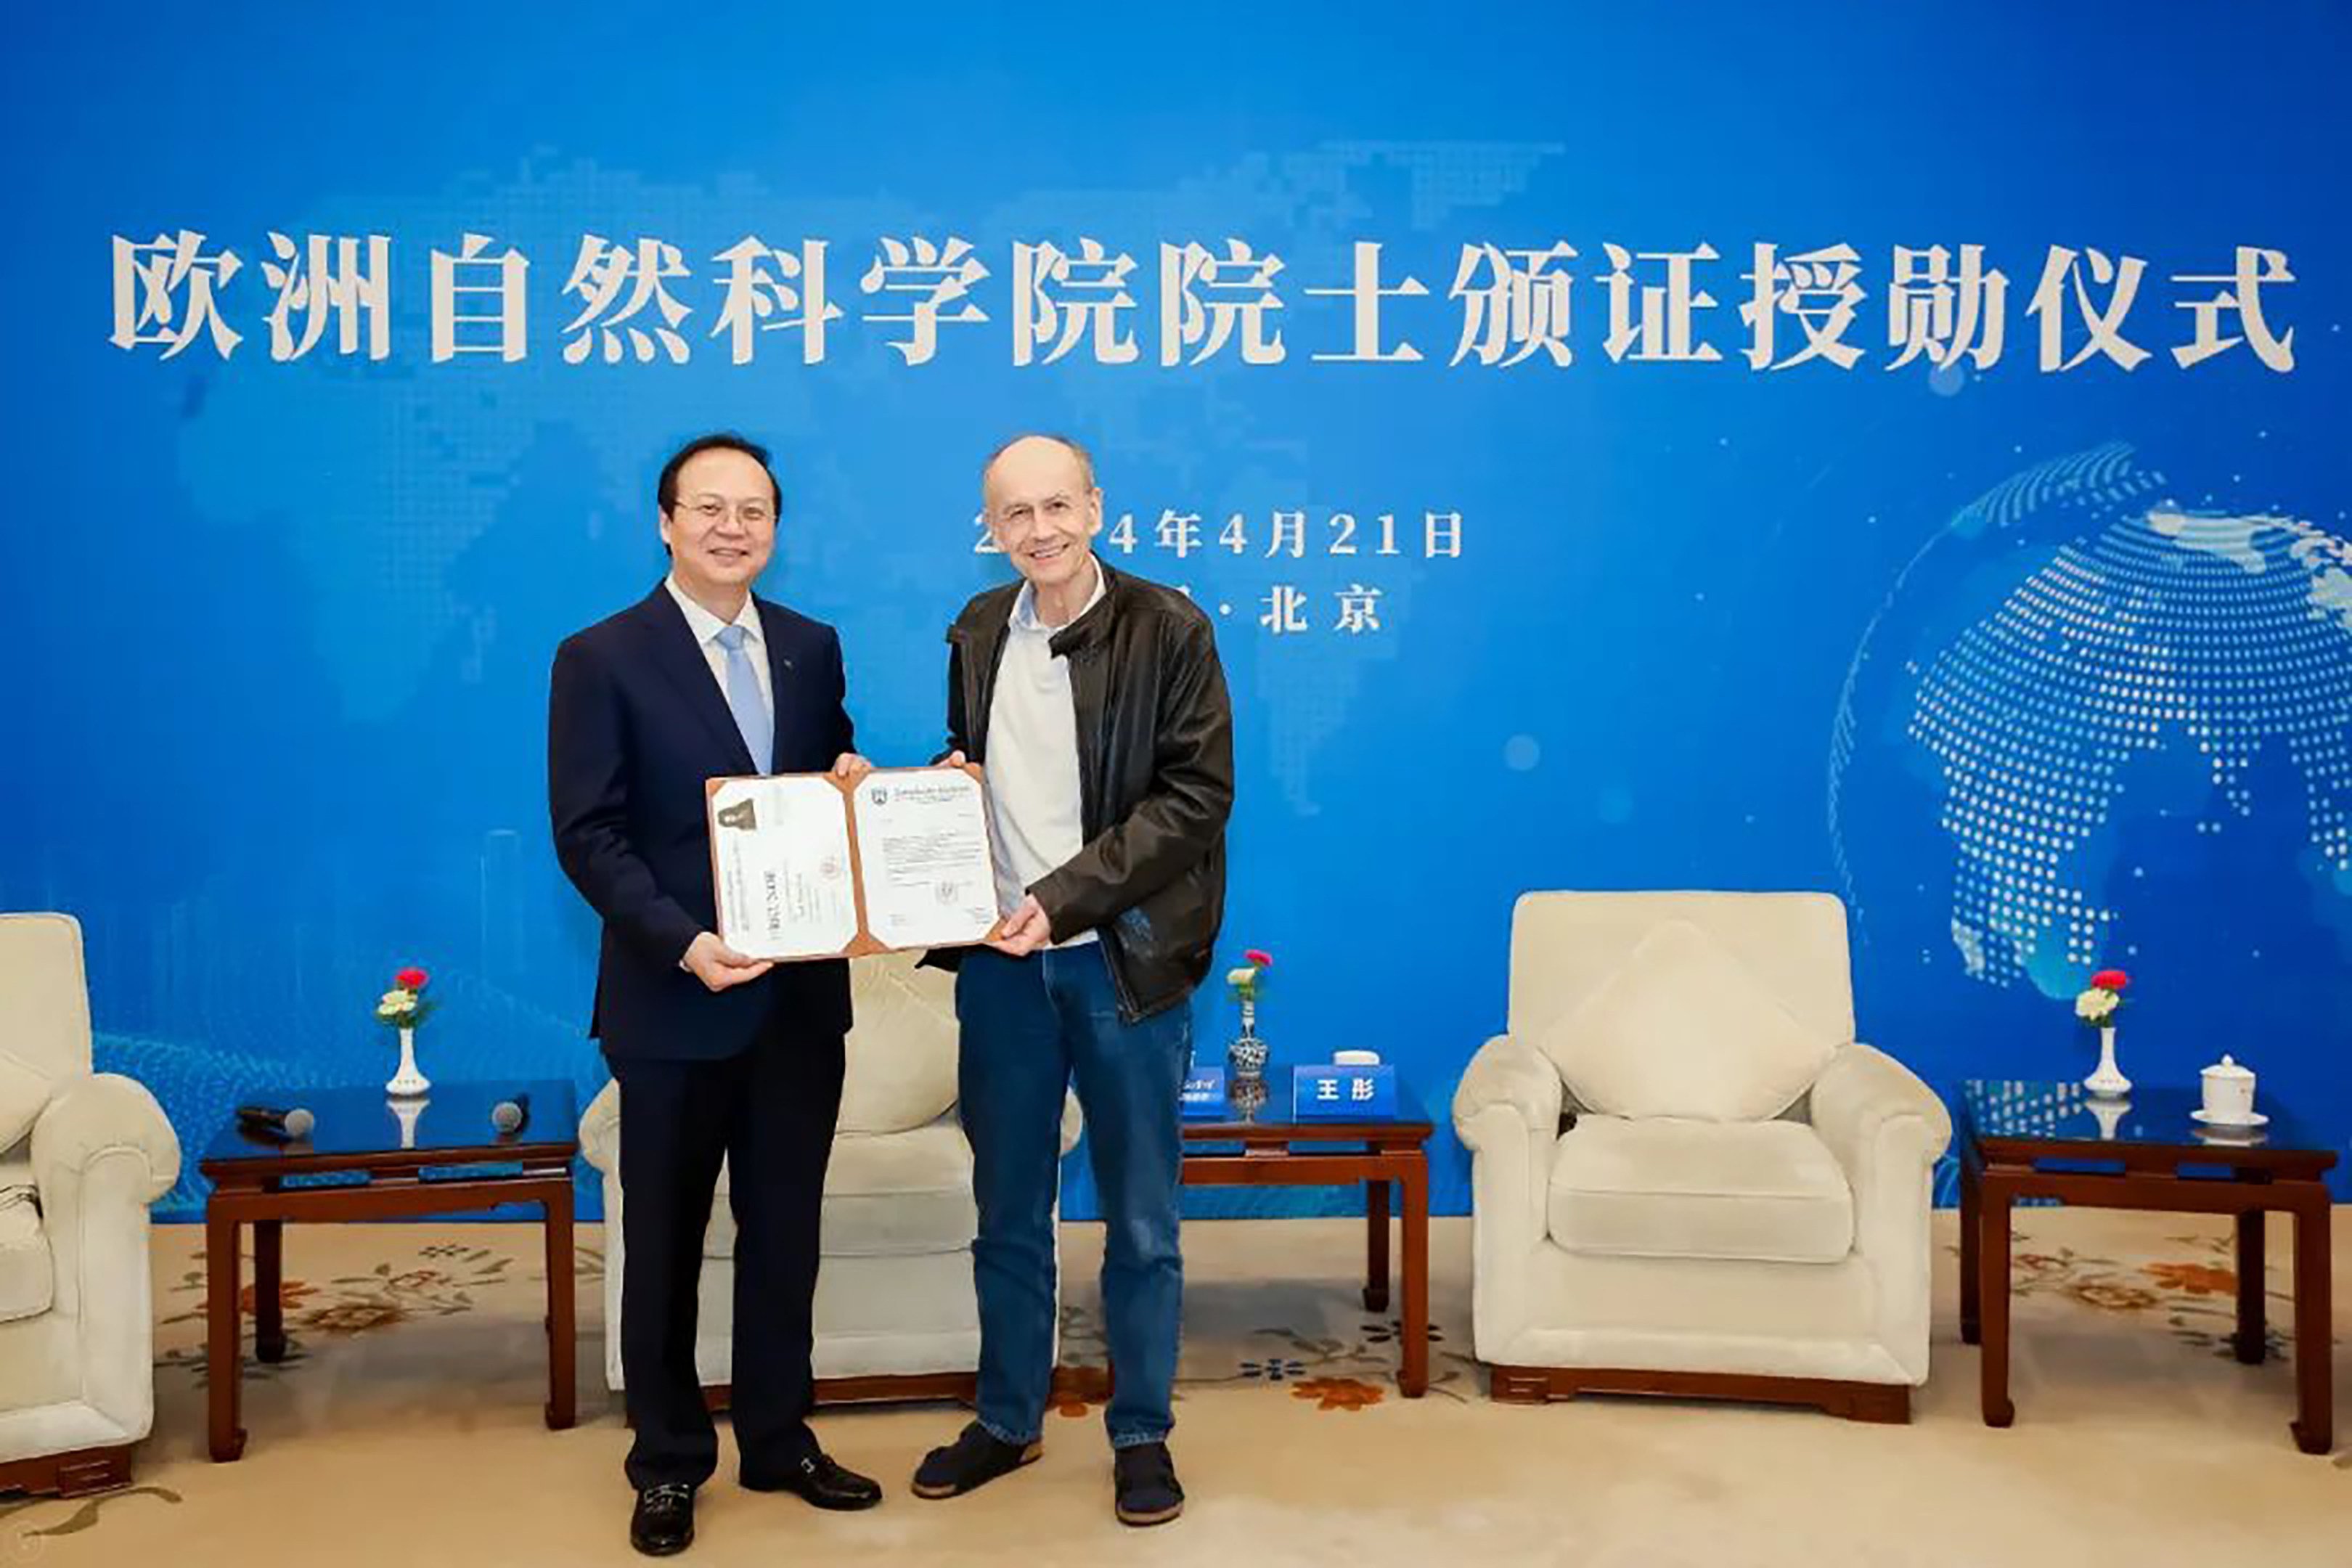 Nobel laureate Thomas C. Südhof (right) with China Development Research Institute’s president Wang Tong. Photo: China Development Research Institute